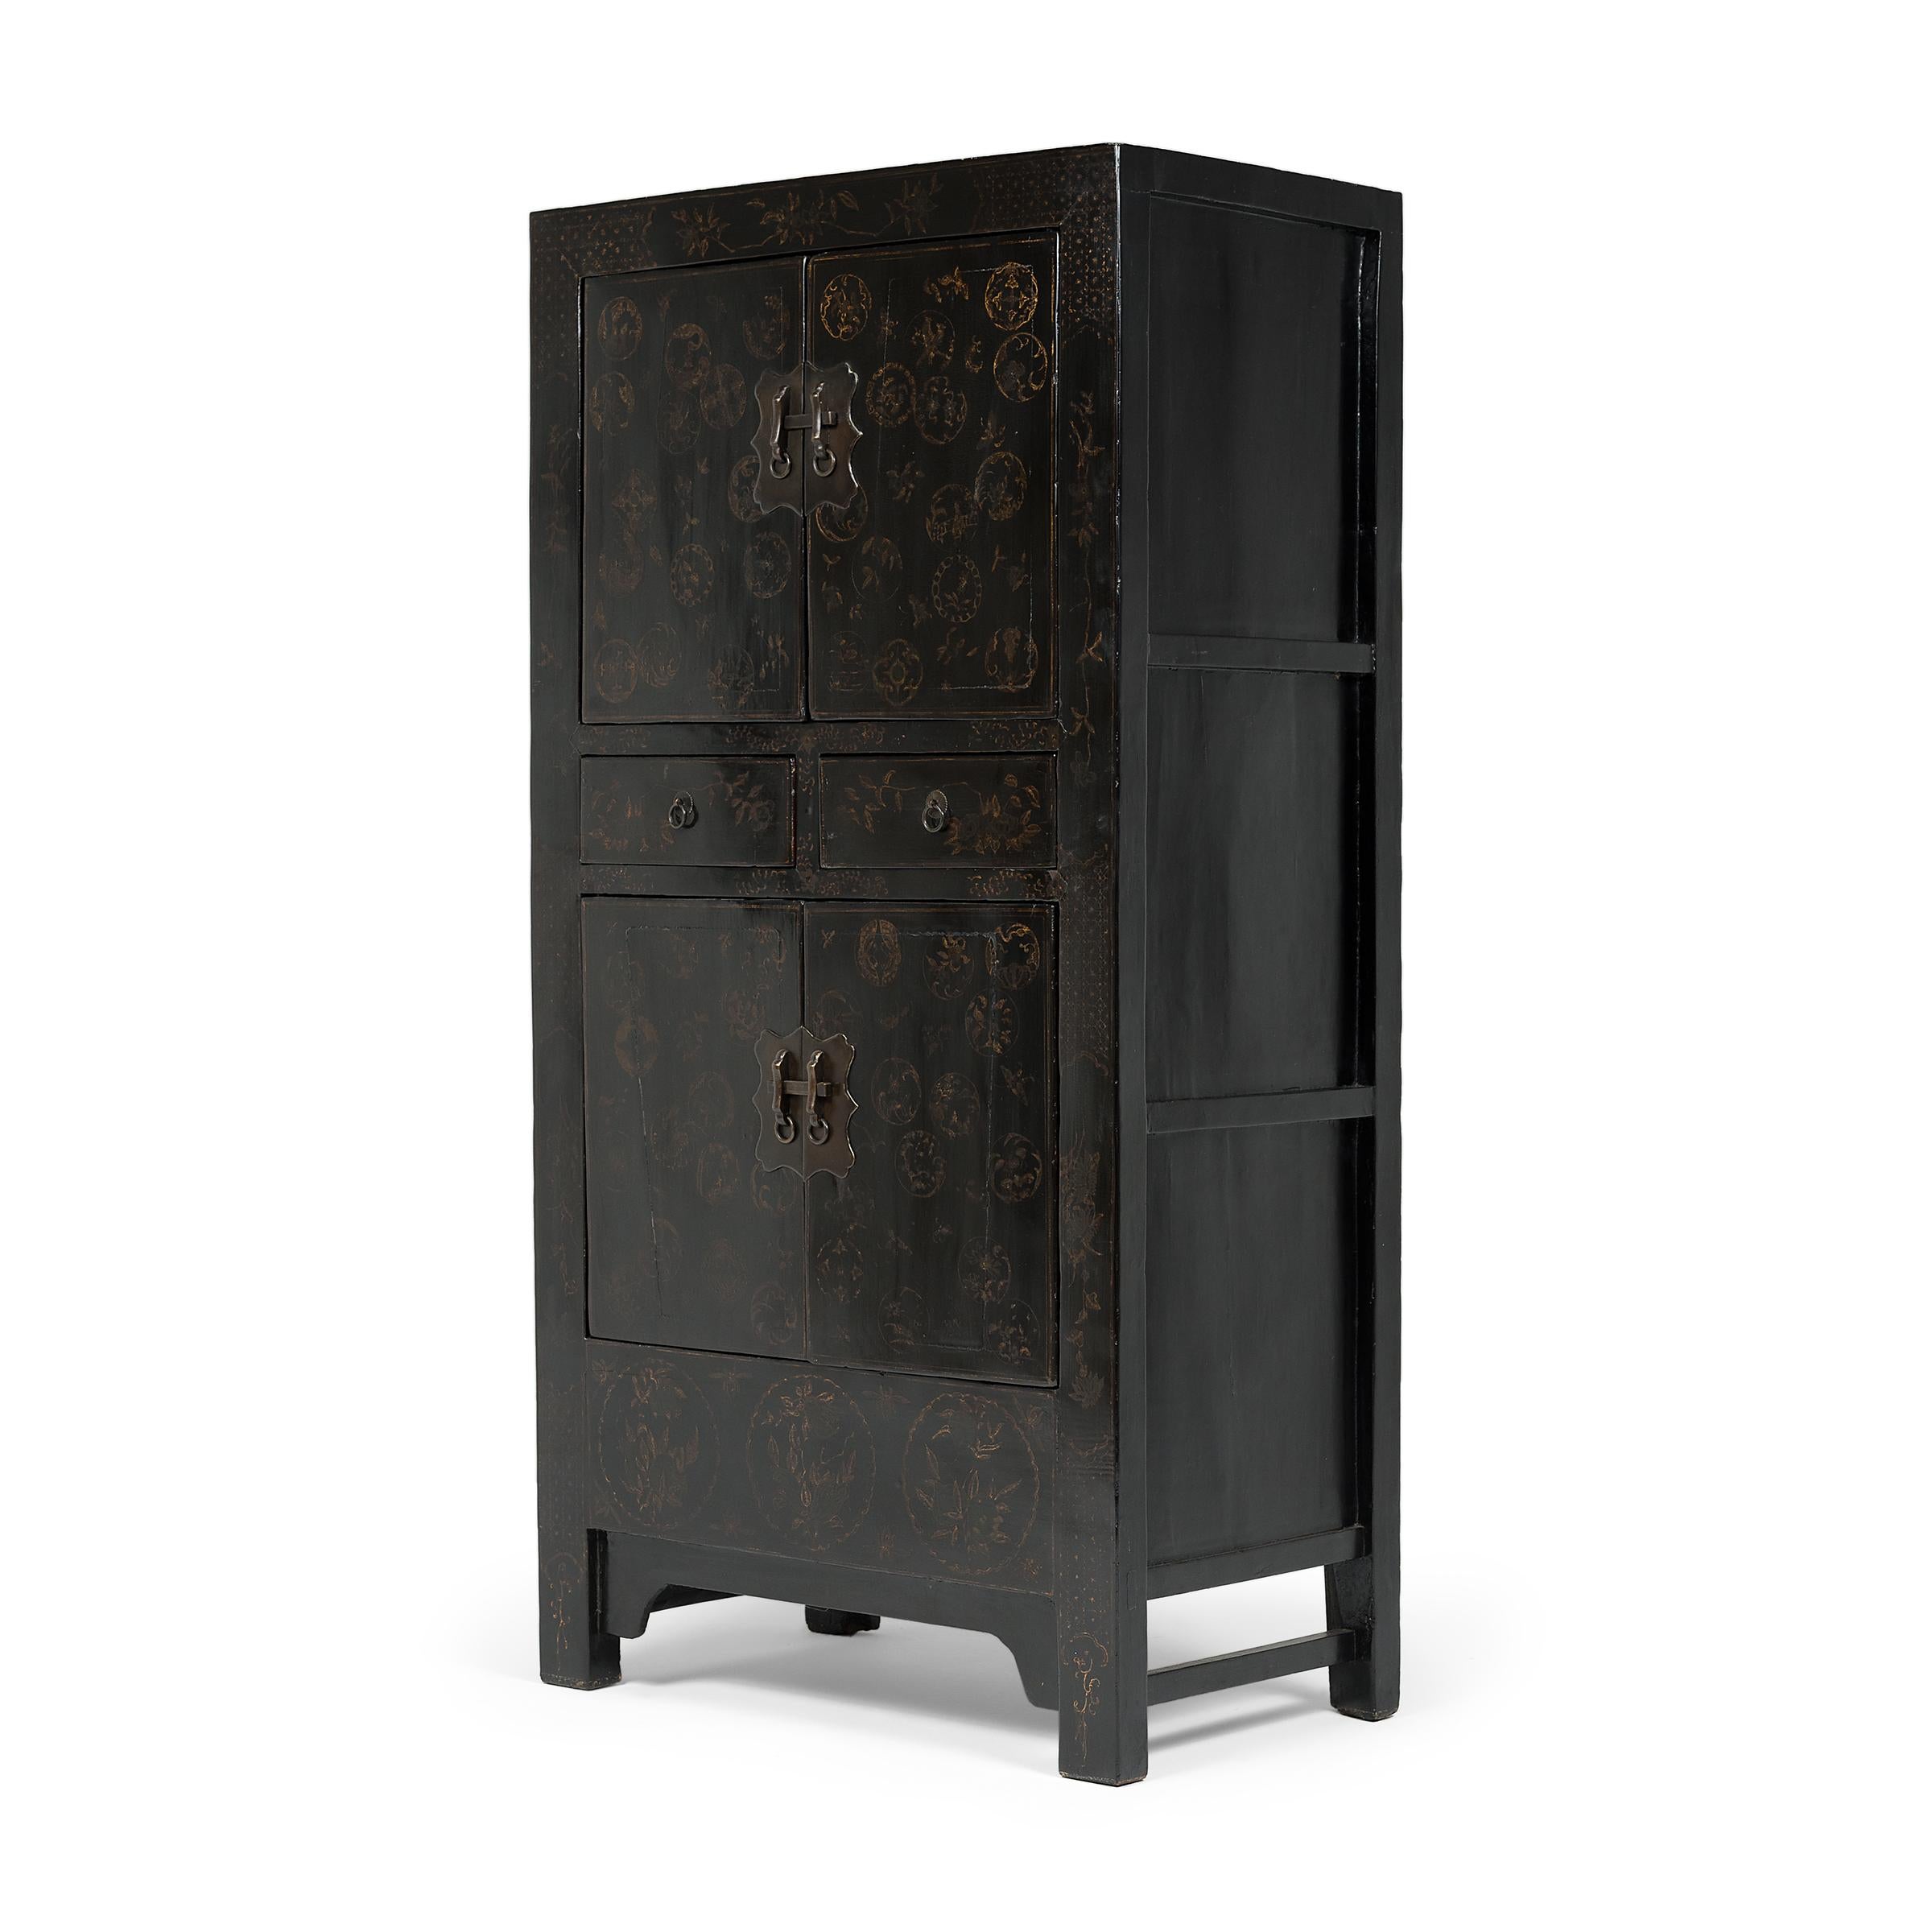 Qing Chinese Gilt Black Lacquer Shanxi Cabinet, c. 1850 For Sale